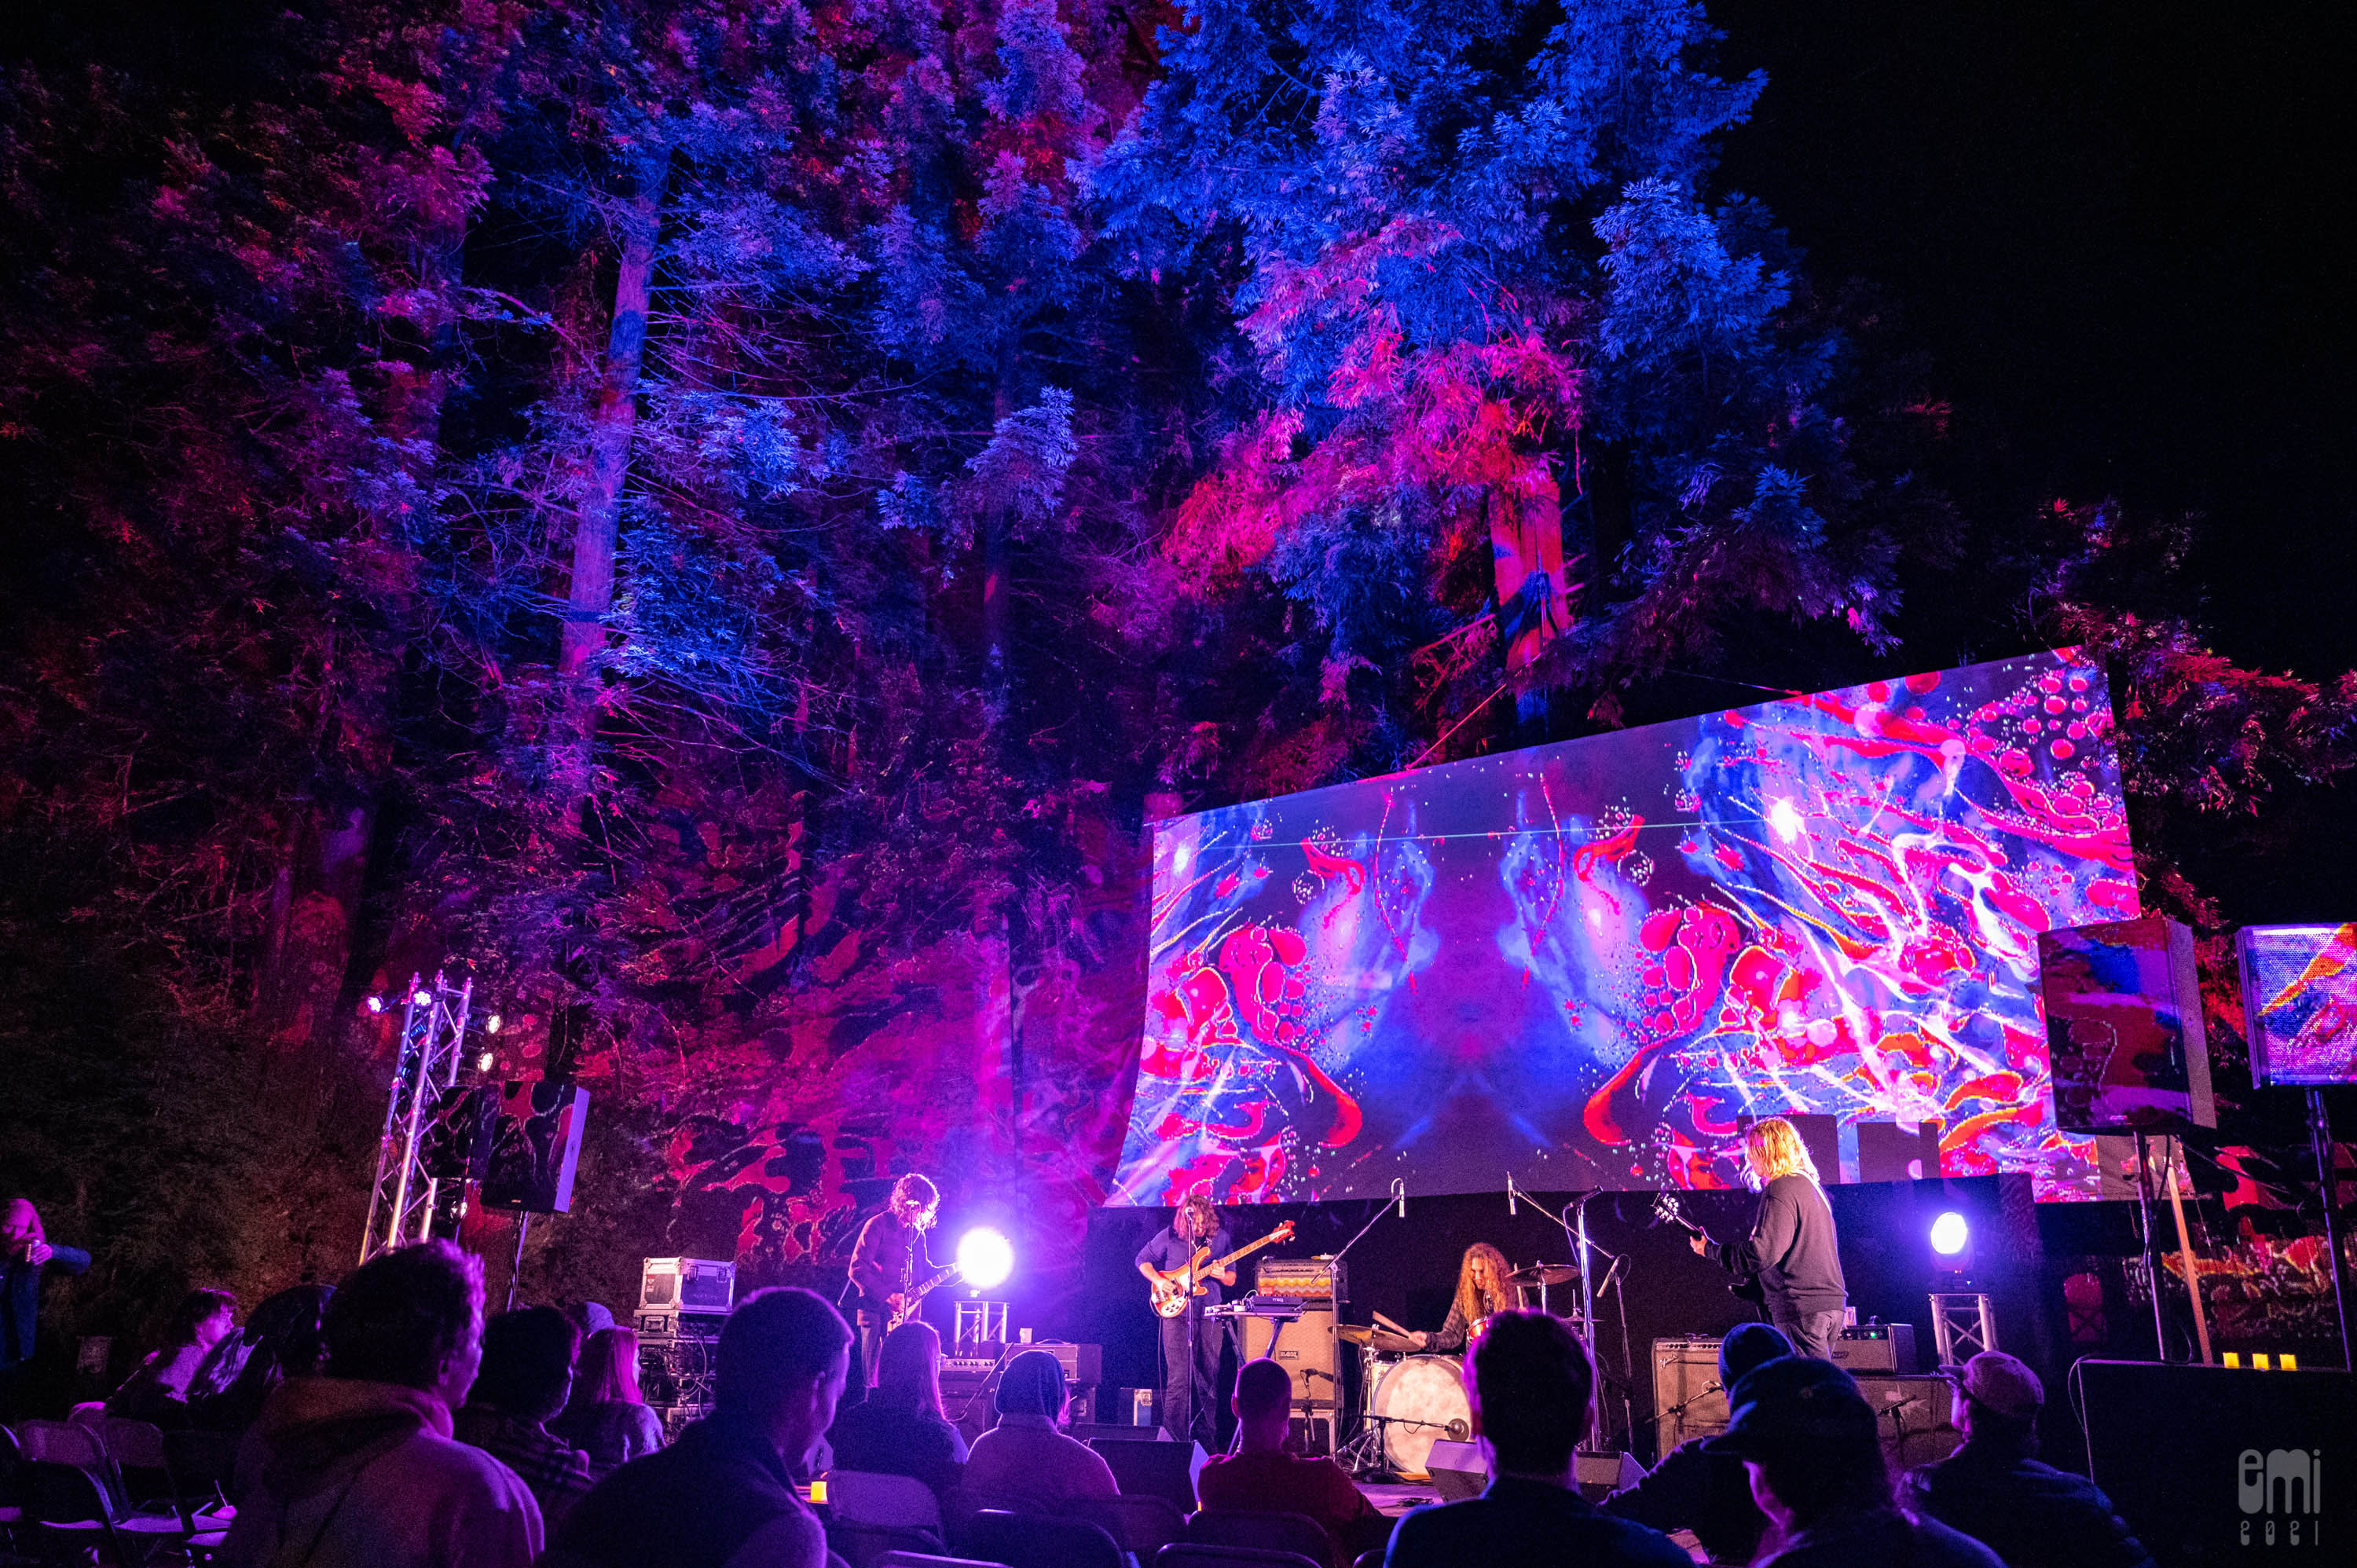 Photography – 2021.9.15 (((folkYEAH!))) Presents Ty Segall and the Freedom Band and Jess Cornelius with Mad Alchemy Liquid Light Show at Henry Miller Memorial Library, Big Sur, CA